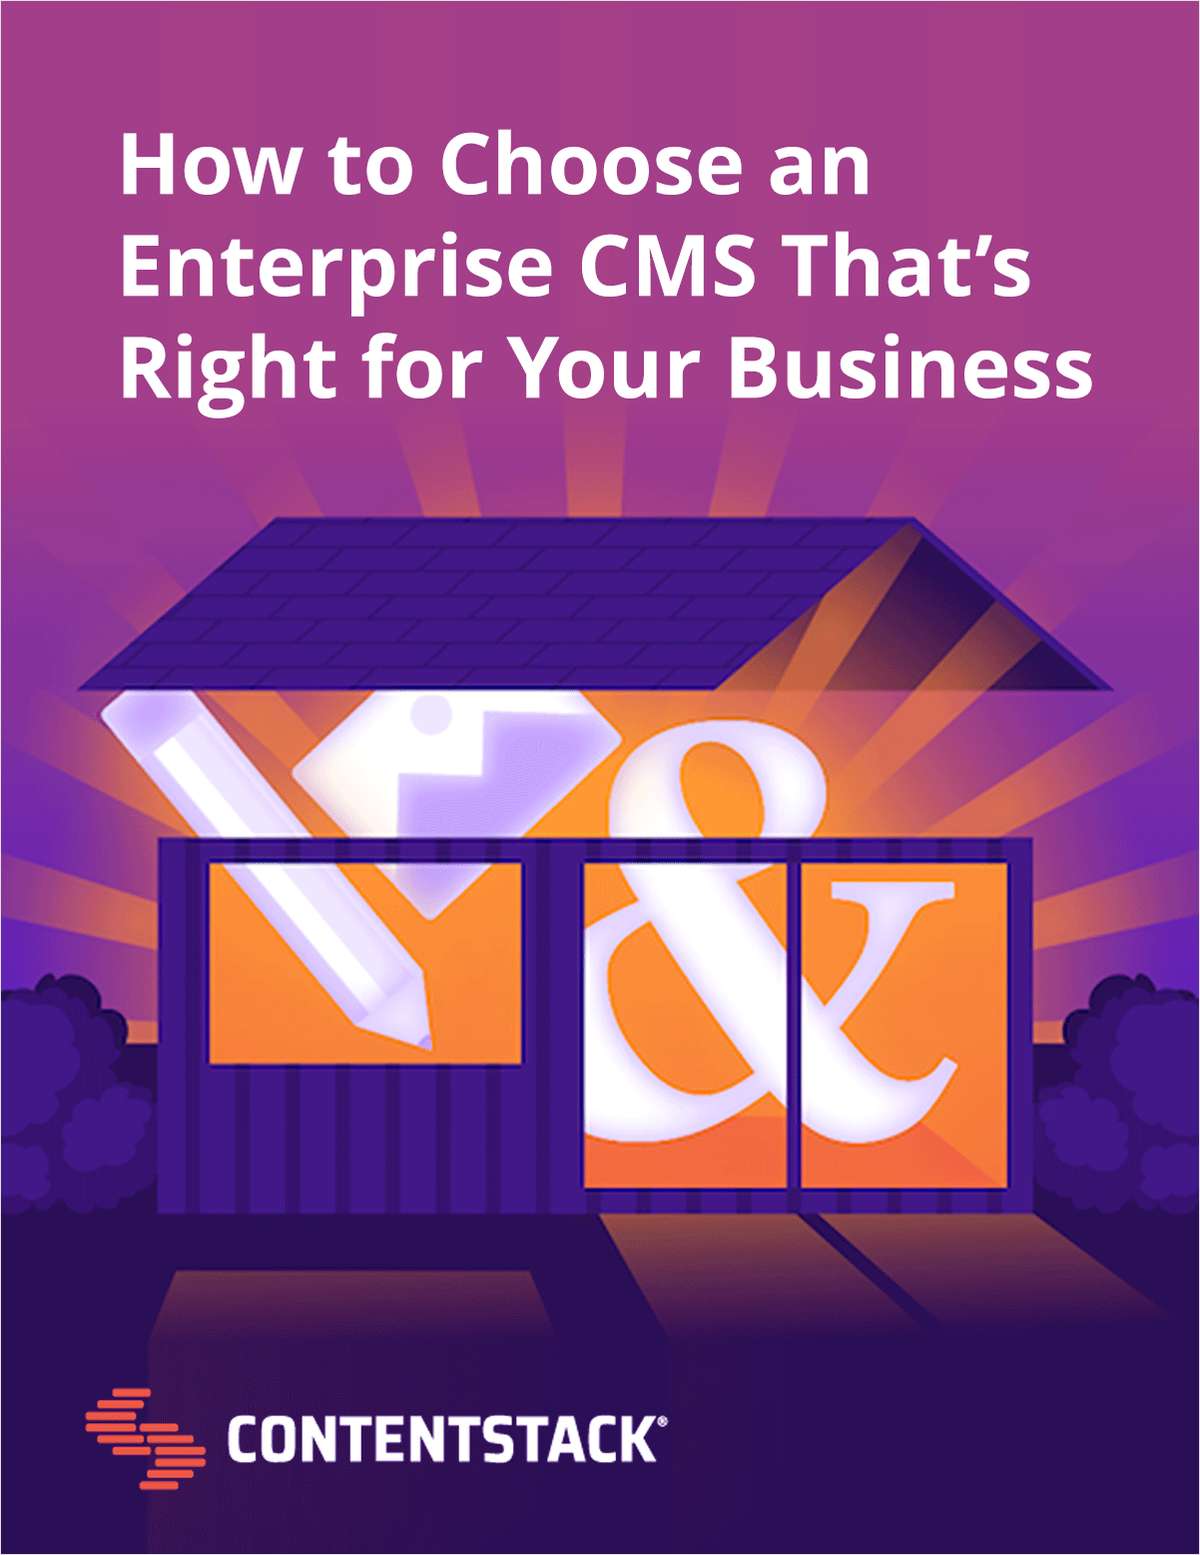 How to choose an enterprise CMS that's right for your business